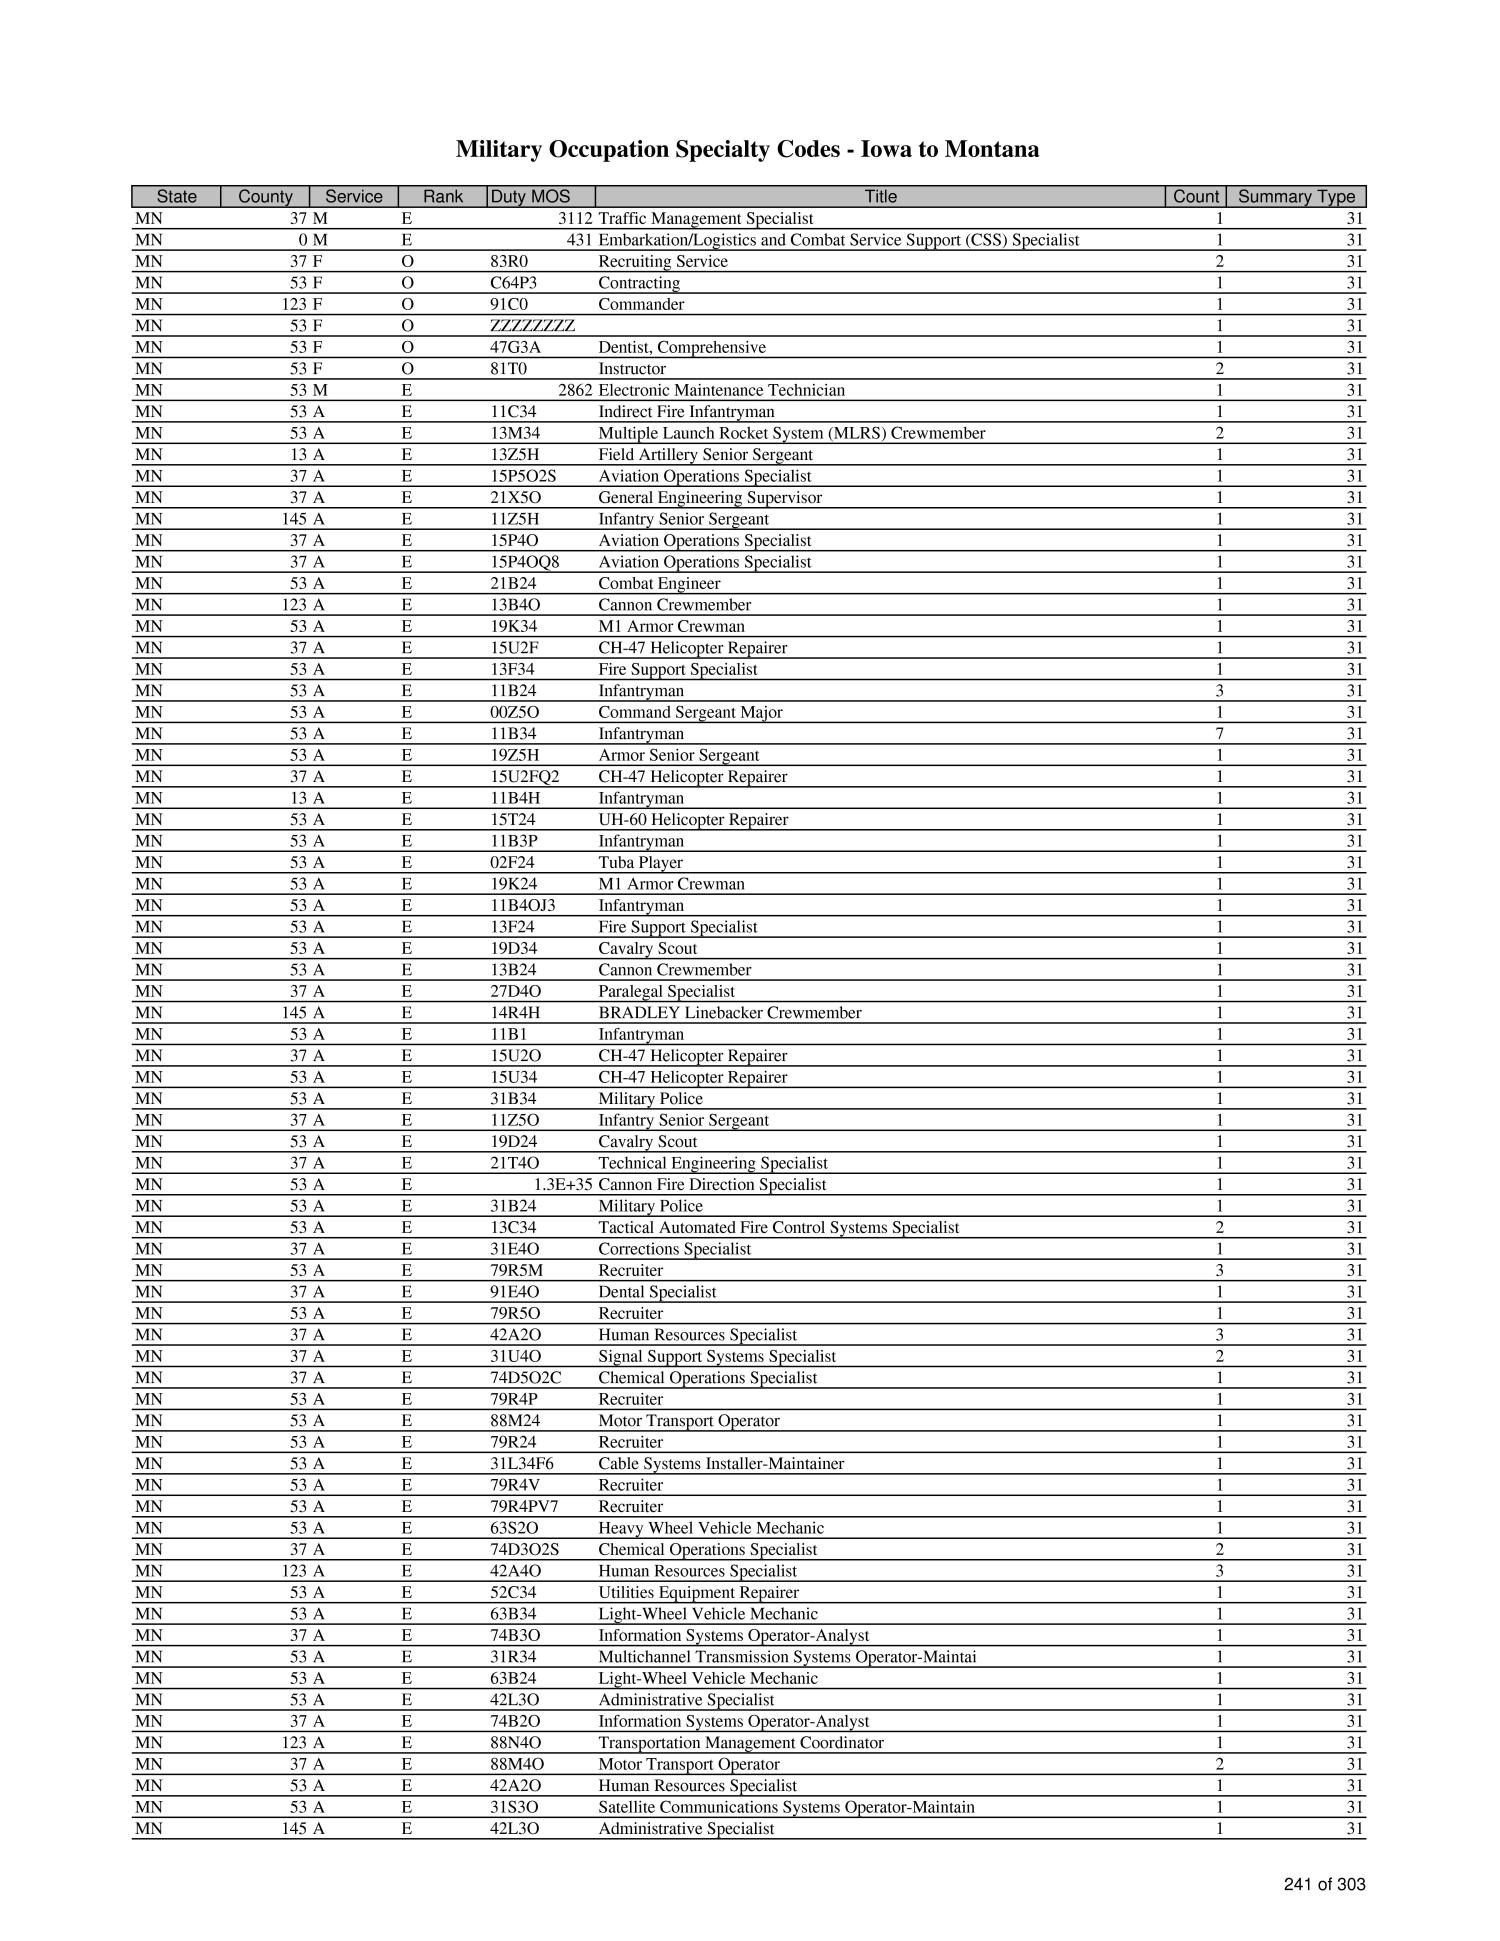 list-of-military-occupation-specialty-codes-mos-by-state-and-county-page-530-of-1-684-unt